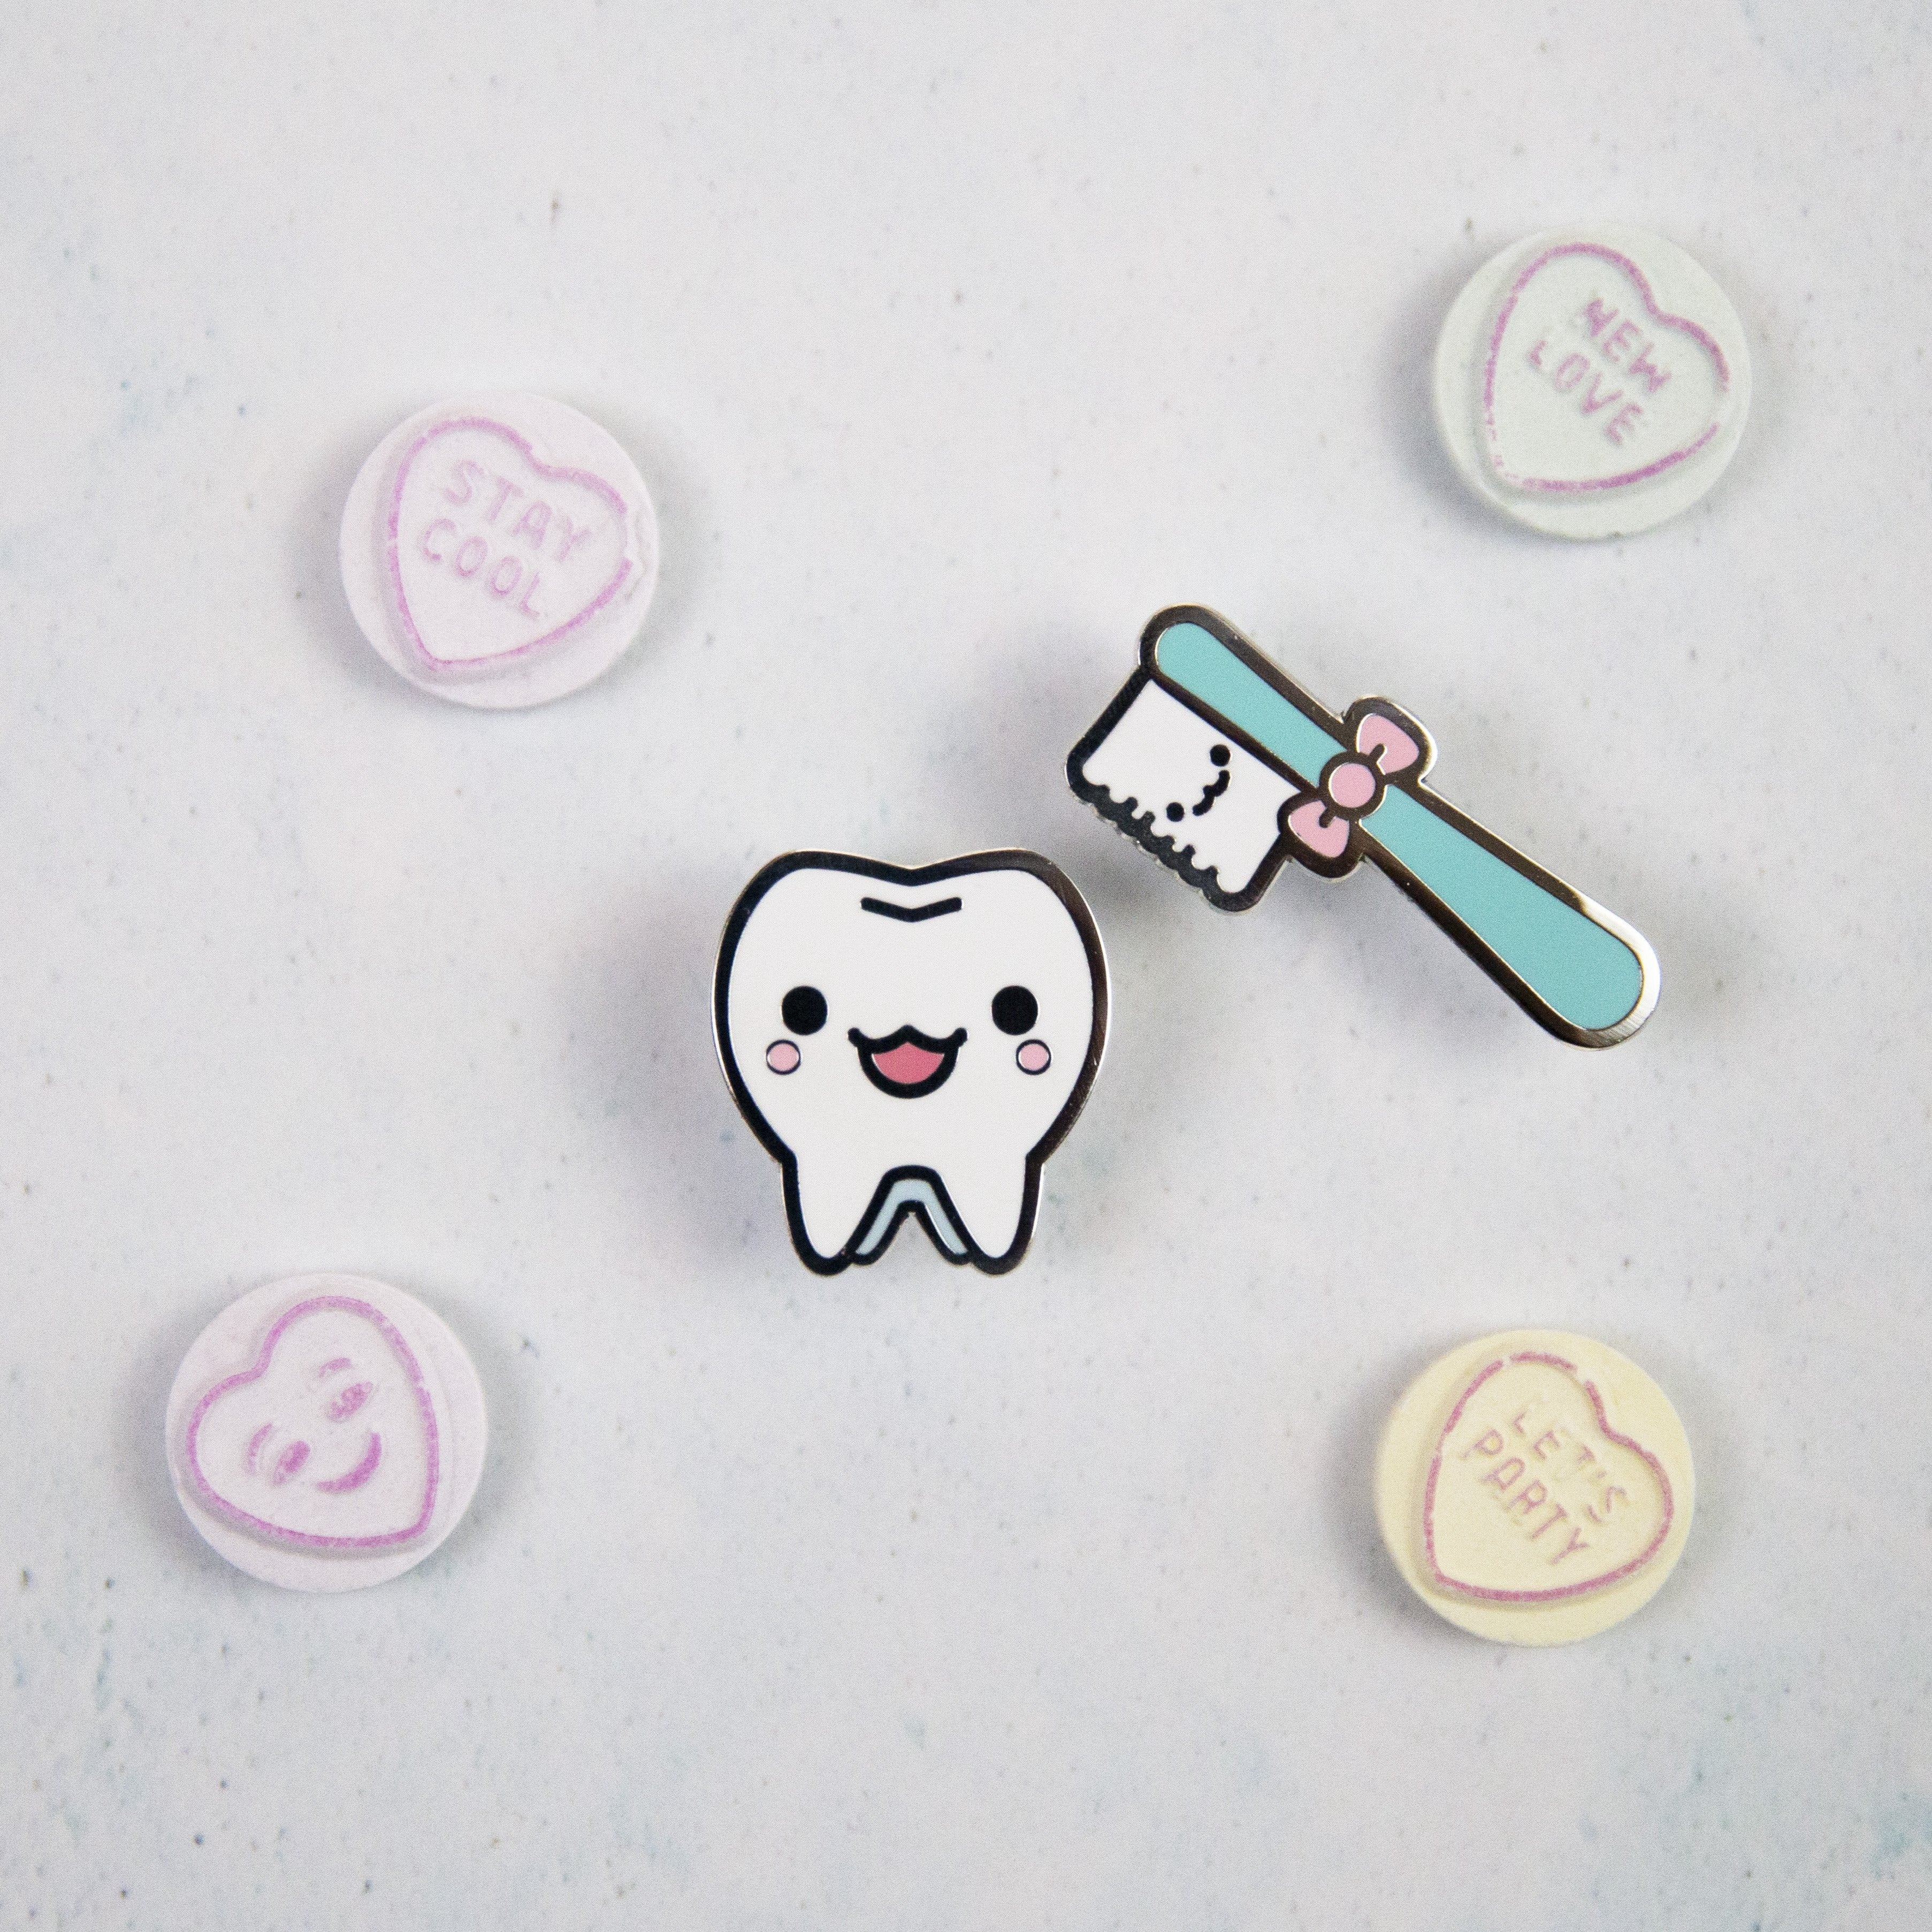 Cute Tooth & Toothbrush